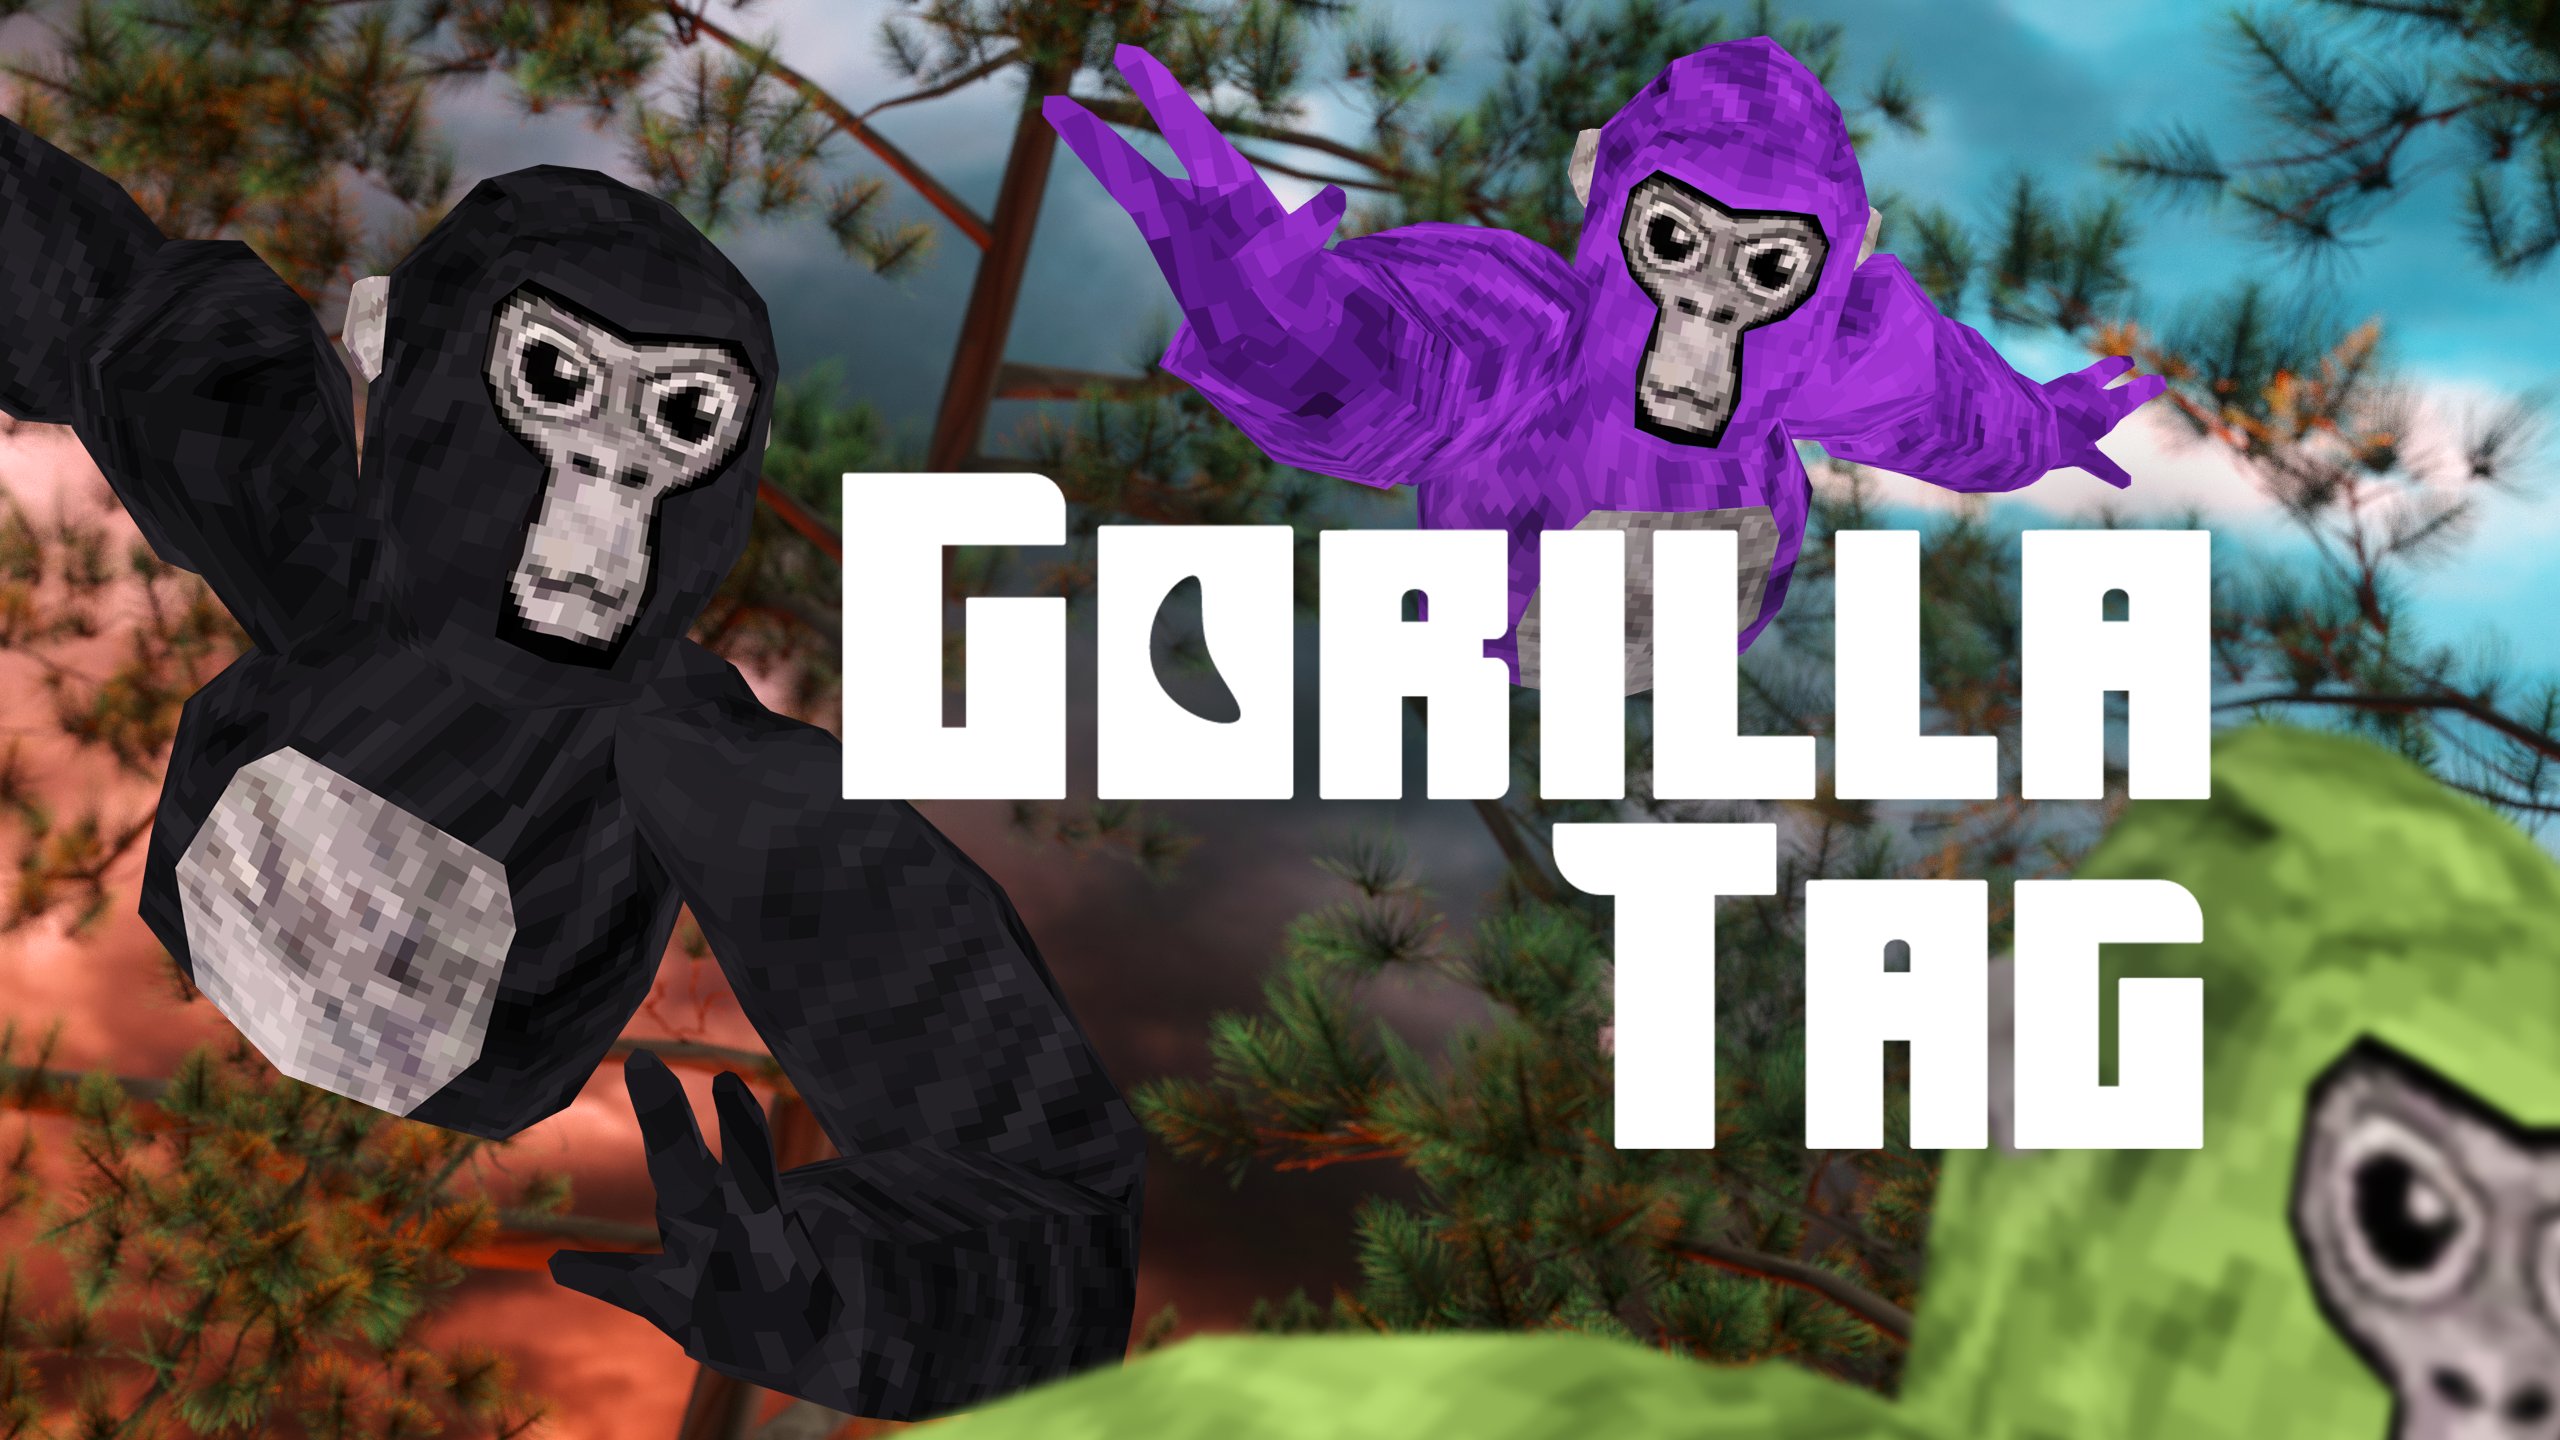 LemmingVR on X: Gorilla Tag v1.0.6 is out! Added support for more